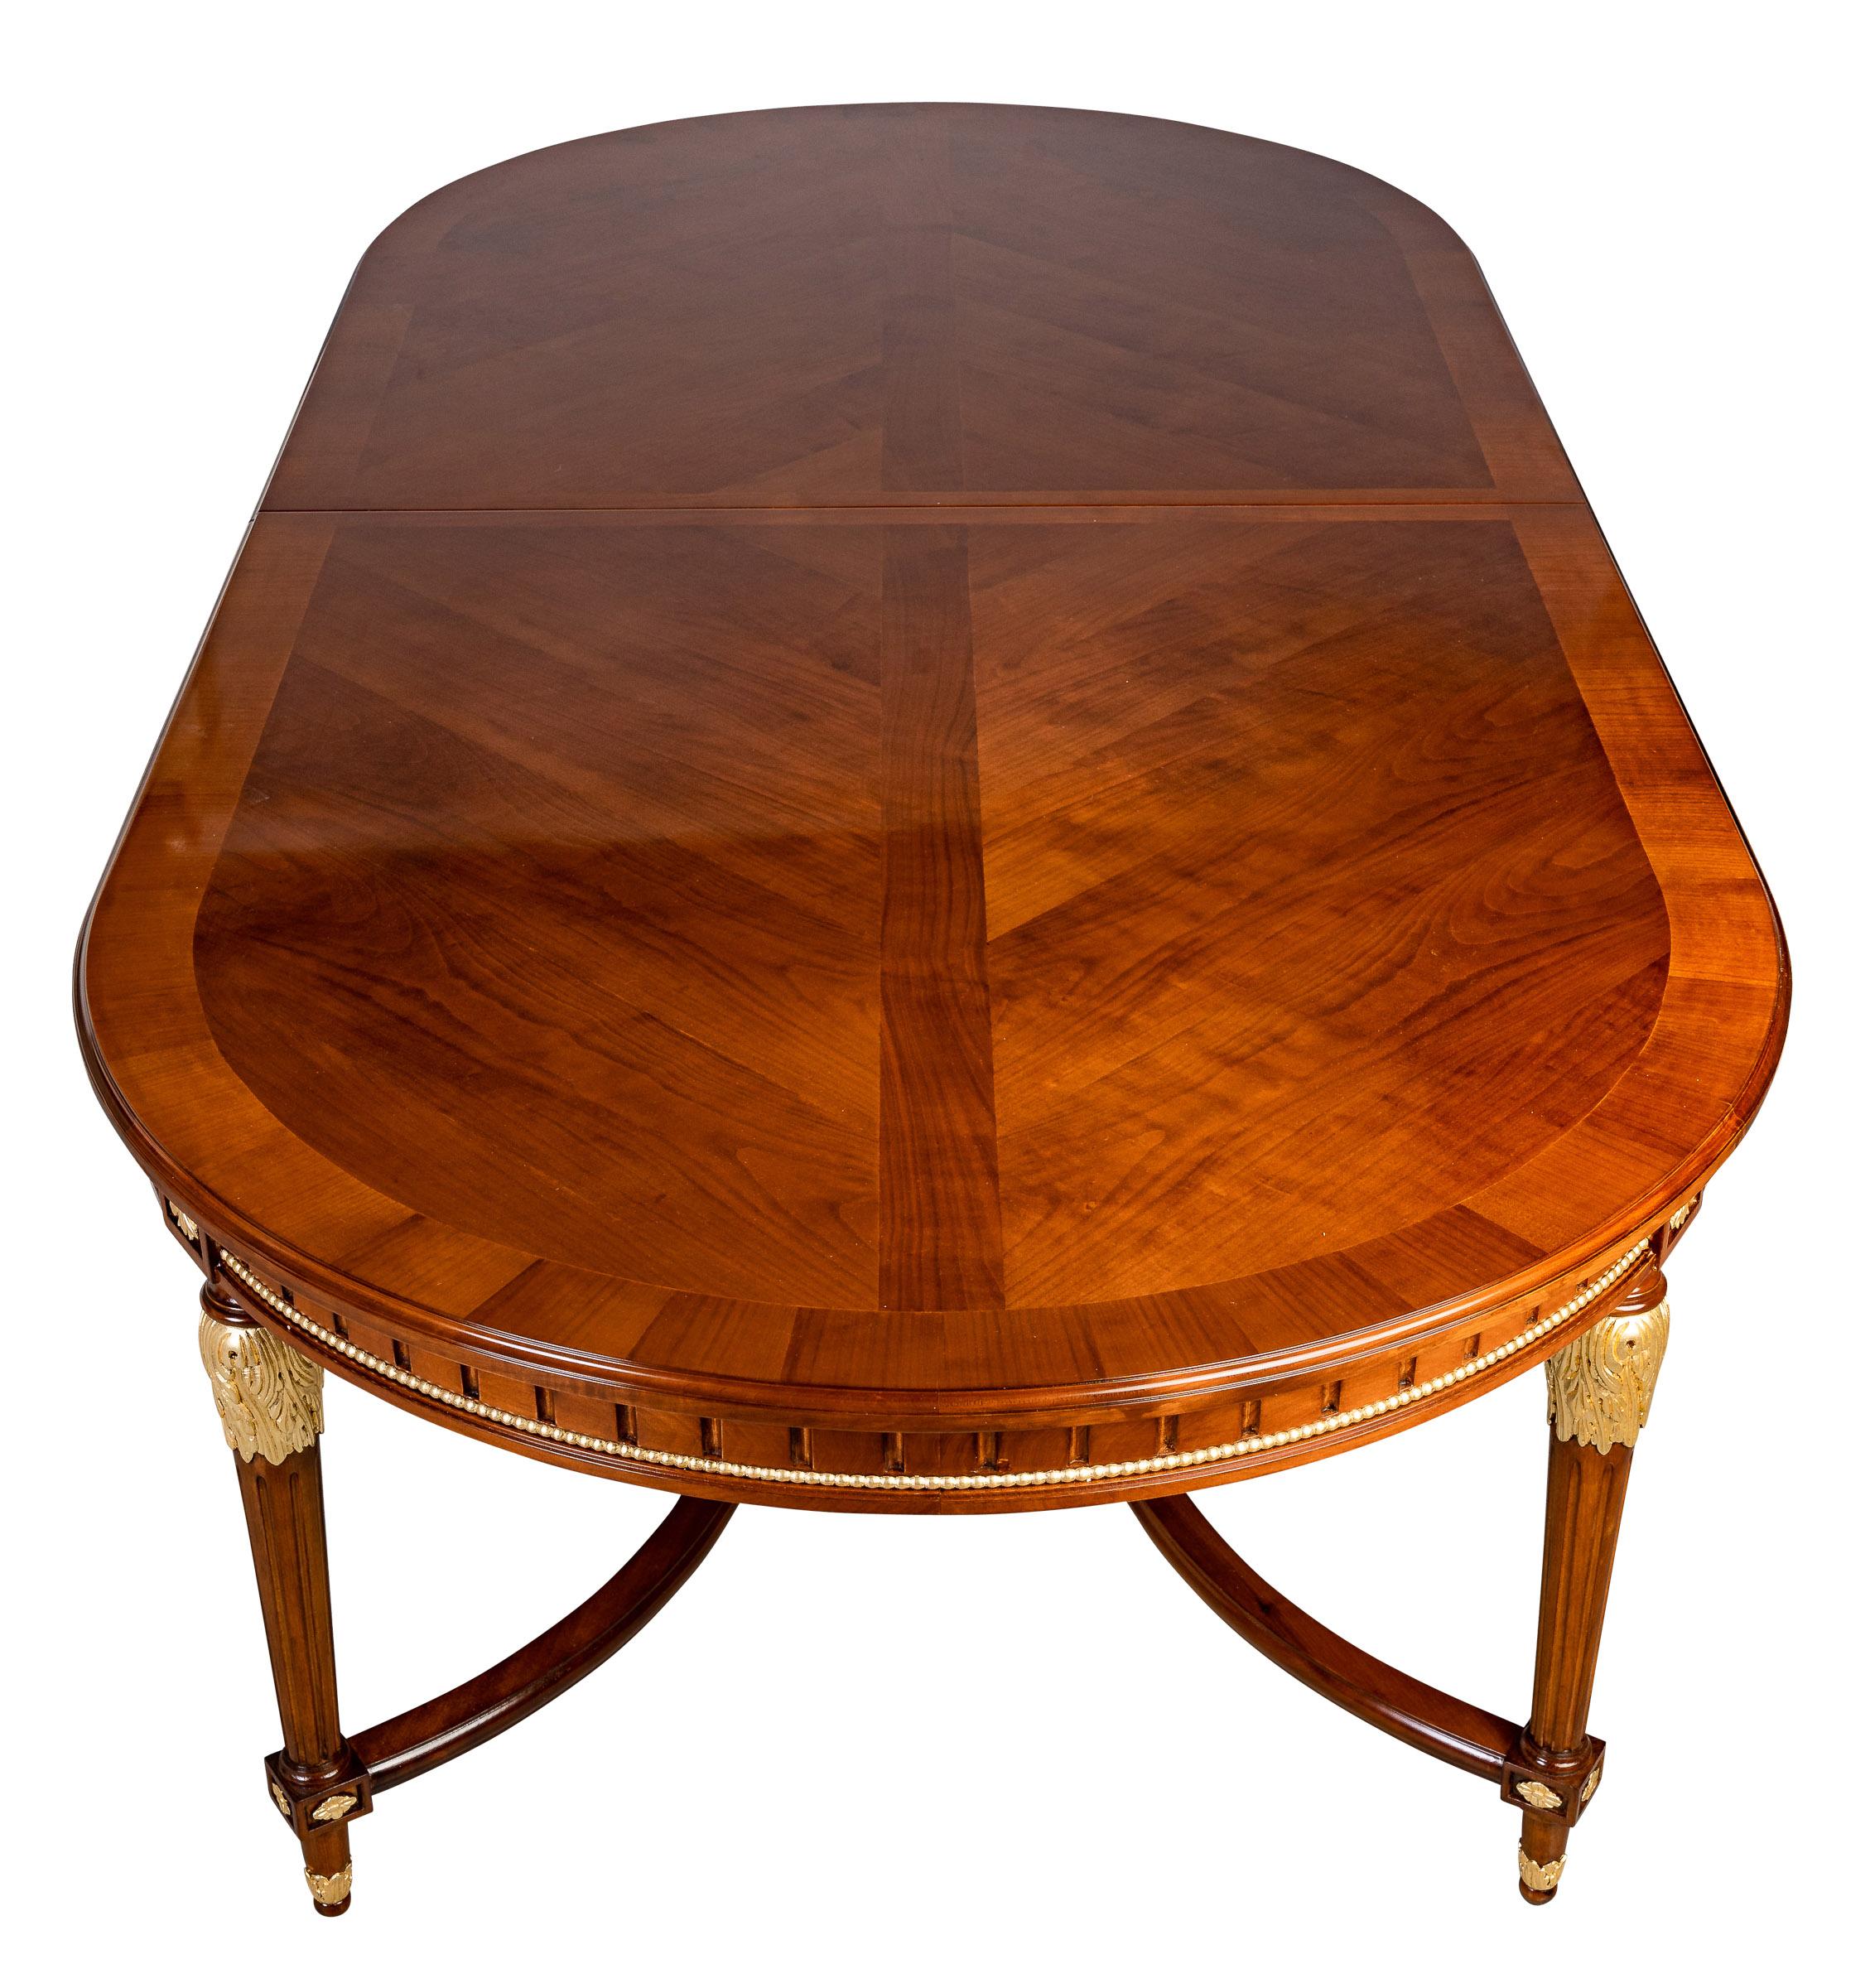 An exquisite French 19th century Louis XVI style dining table with two extensions. The table is raised by Impressive circular fluted tapered legs. Each leg is decorated with leaves and original gilding. The entire top has a wonderful cherry patina